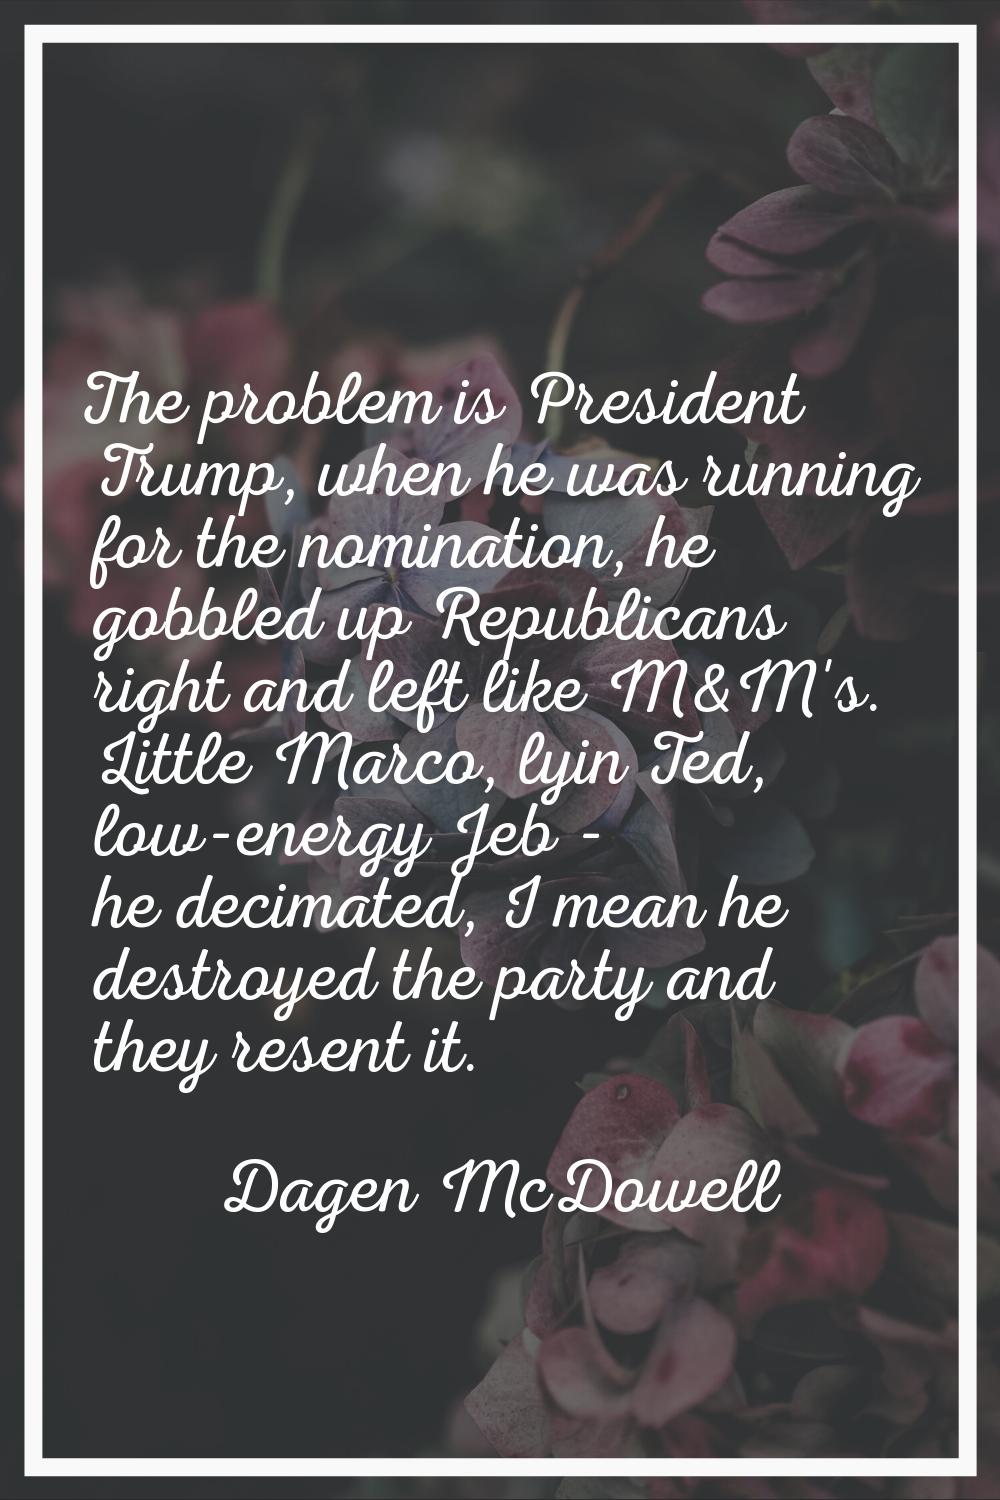 The problem is President Trump, when he was running for the nomination, he gobbled up Republicans r